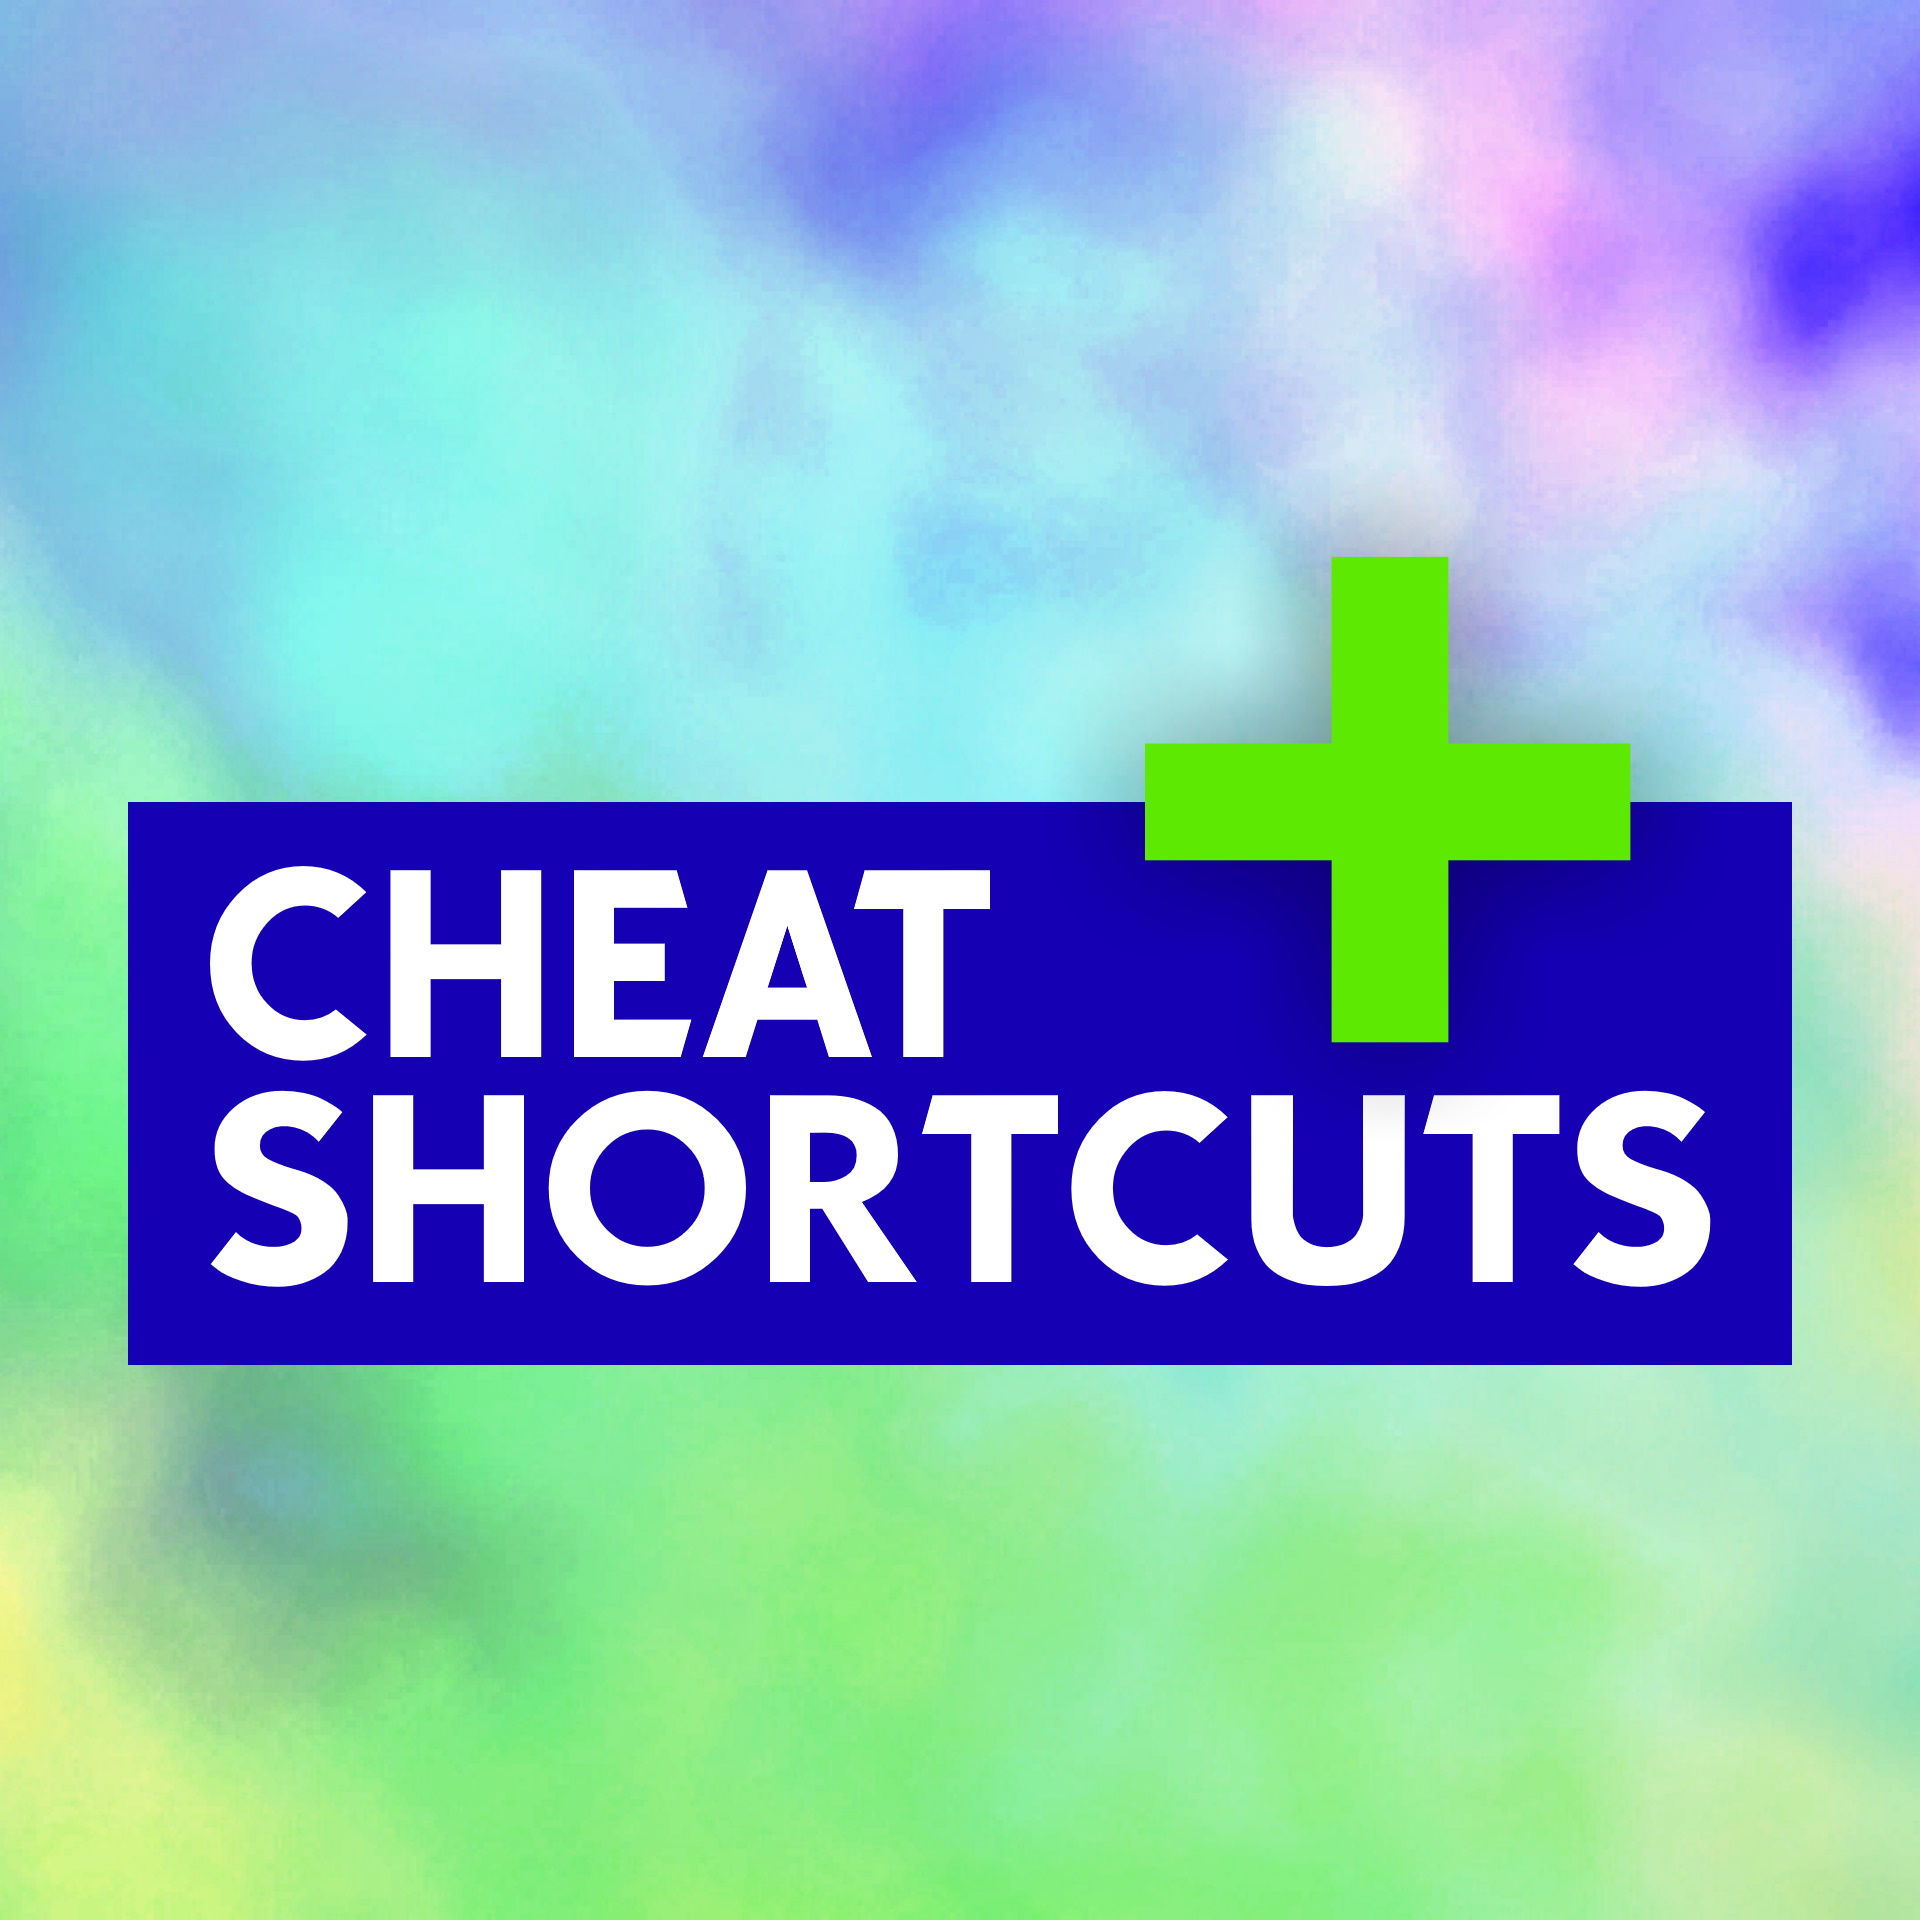 Cheat Shortcuts + - The Sims 4 Mods - CurseForge